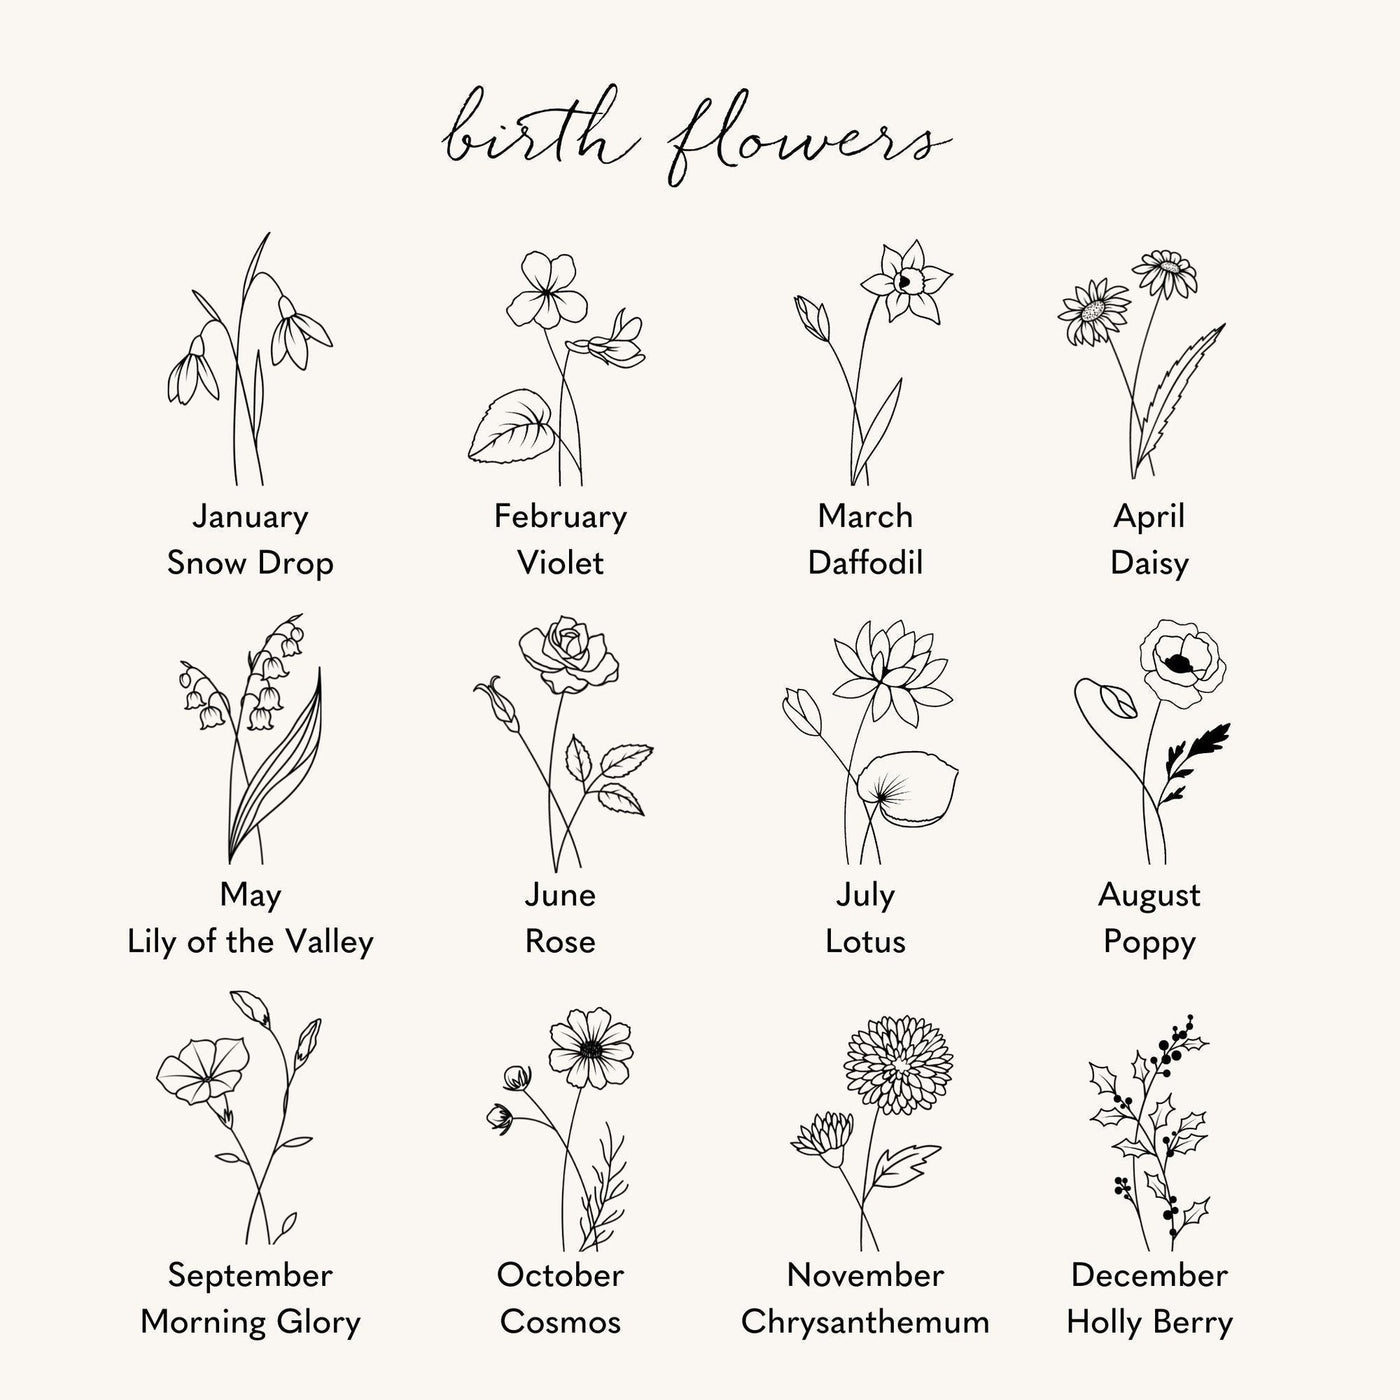 January - Snow Drop February - Violet March - Daffodil April - Daisy May - Lily of the Valley June - Rose July - Lotus August - Poppy September - Morning Glory October - Cosmos November - Chrysanthemum December - Holly Berry